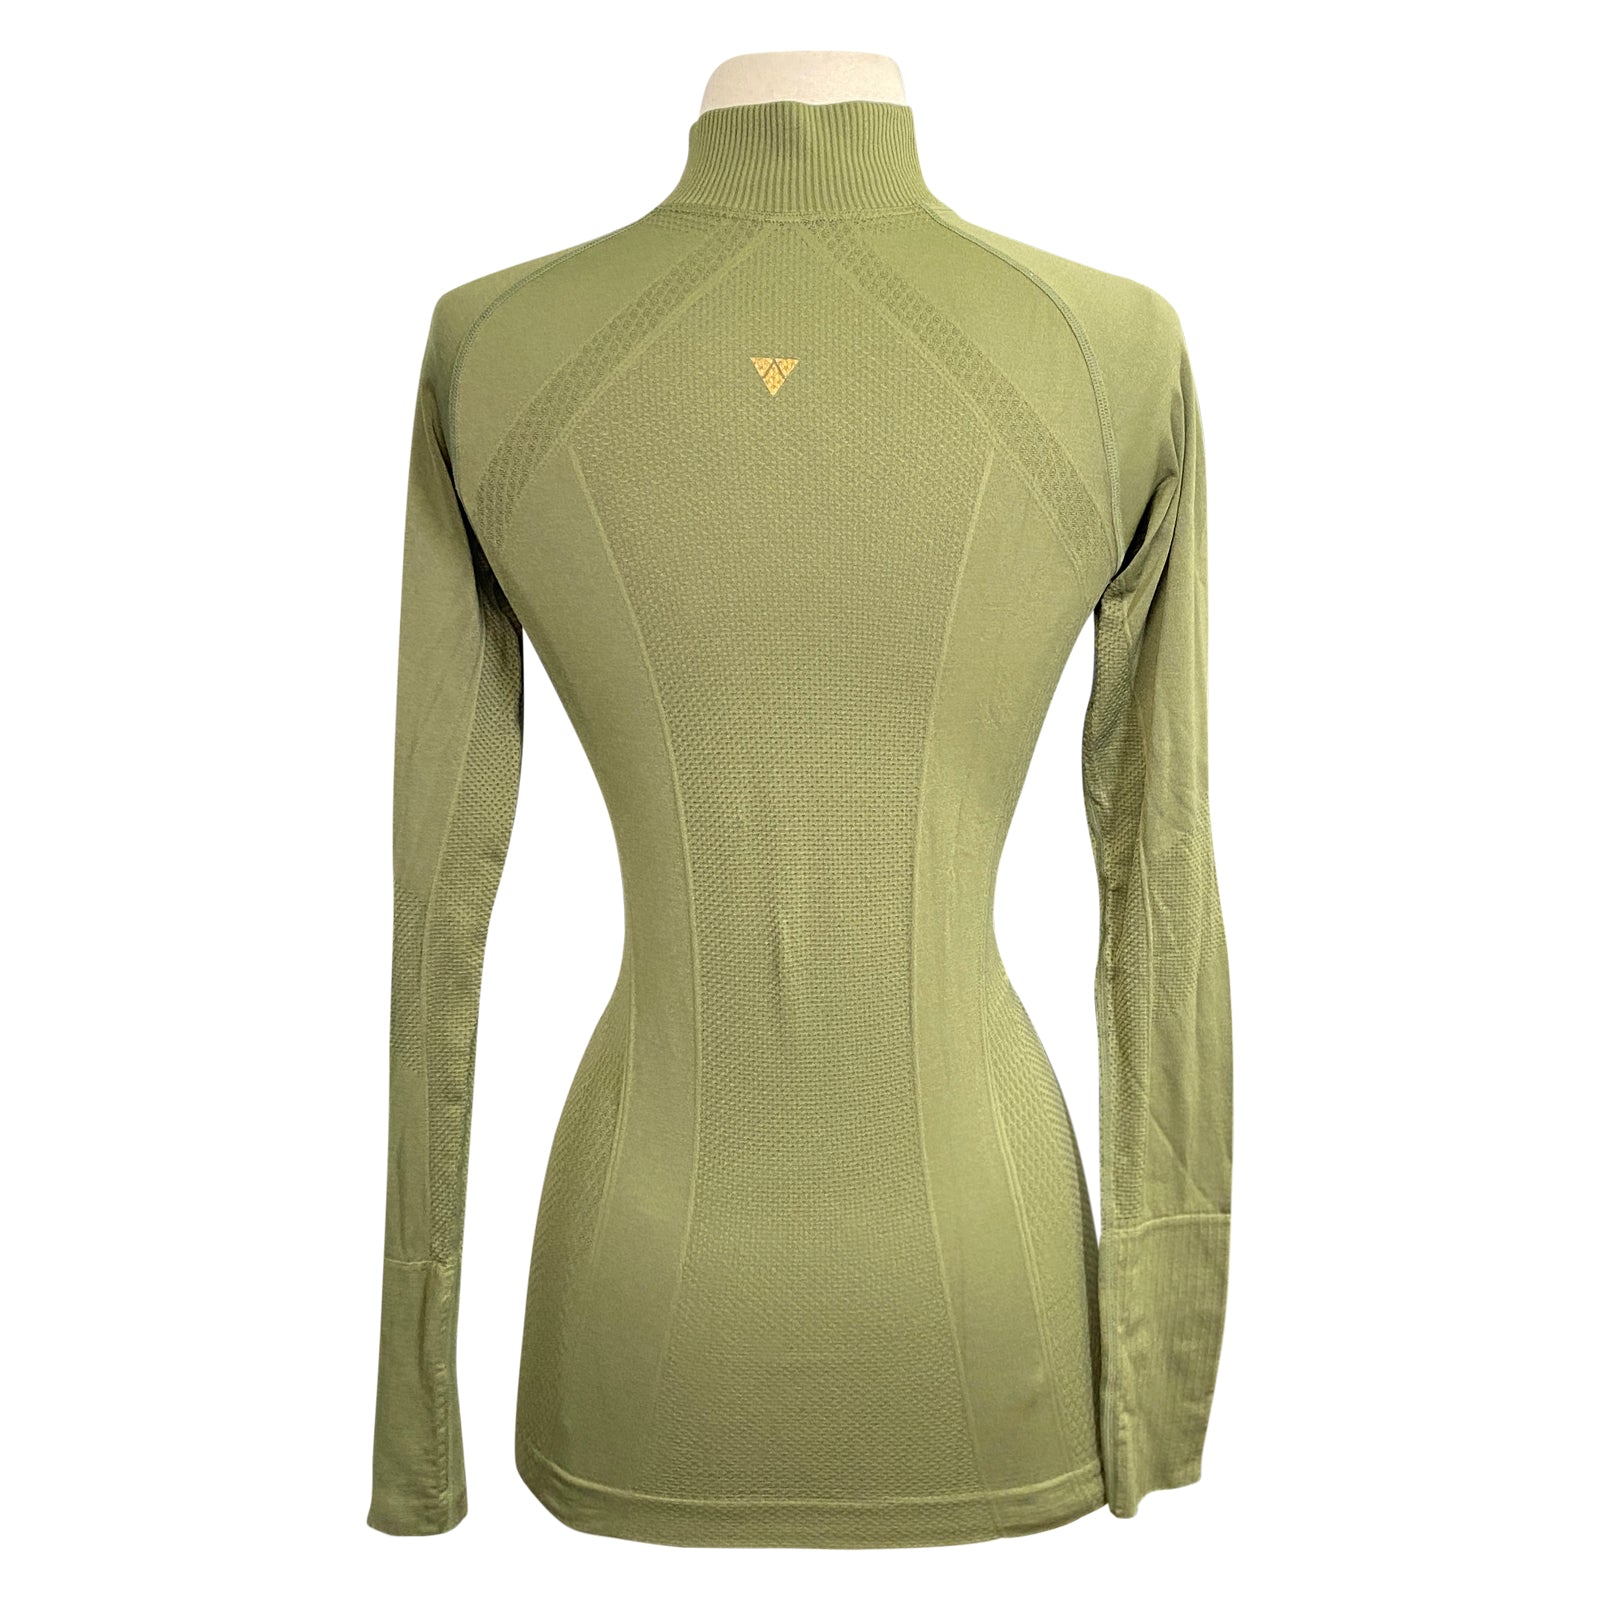 Back of Anique Signature Sunshirt in Olive